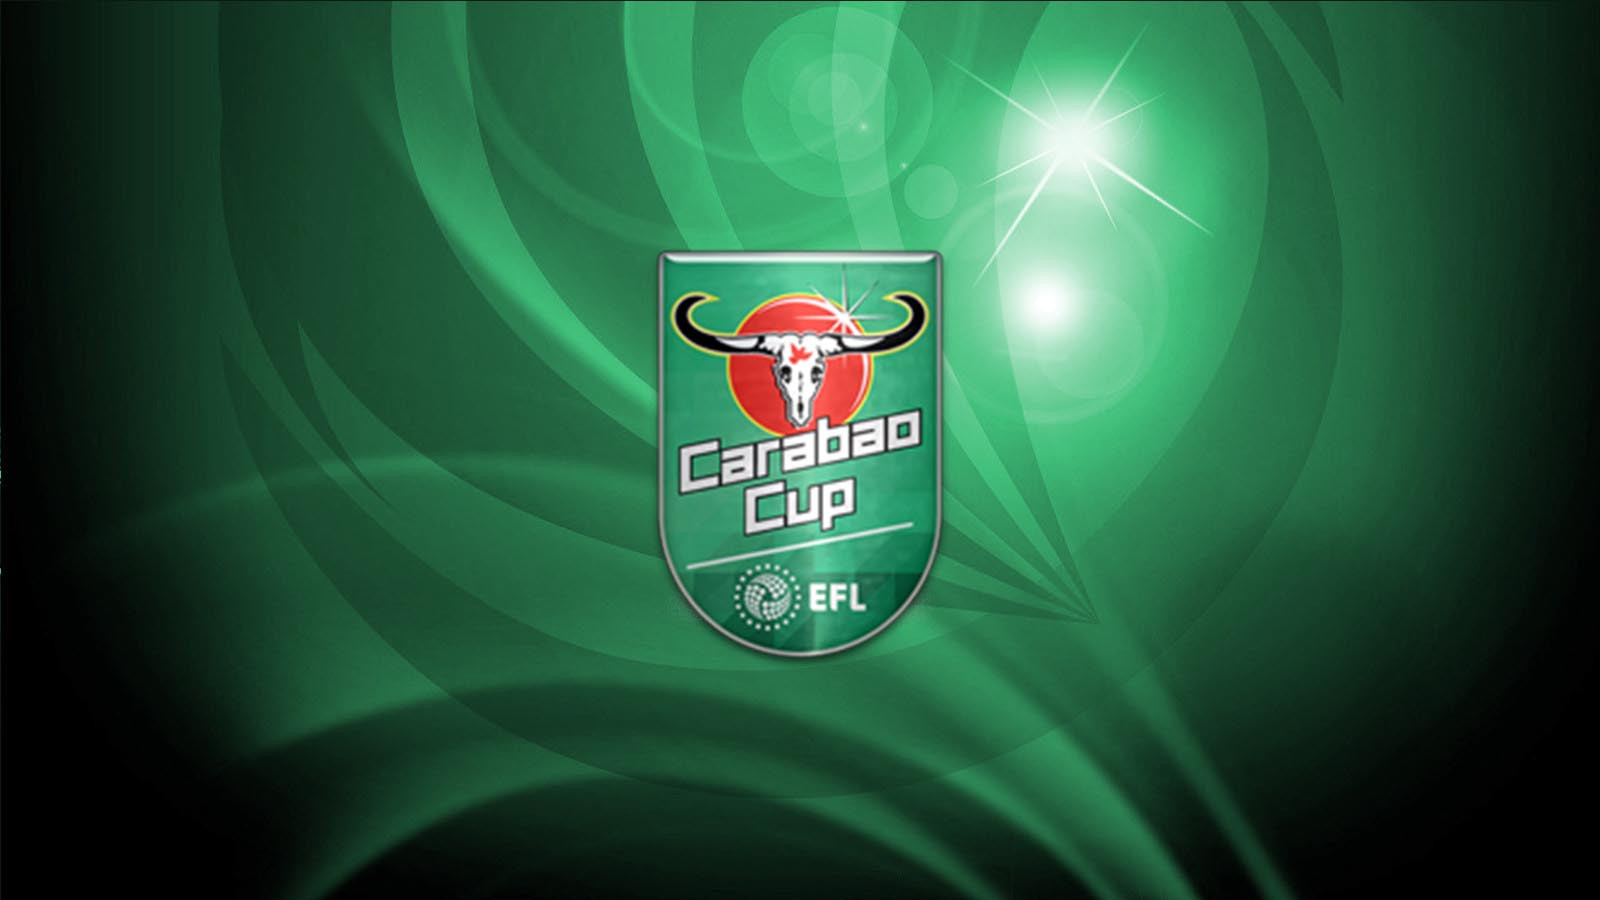 New carabao cup background i had made Football Manager Graphics Manager 2017